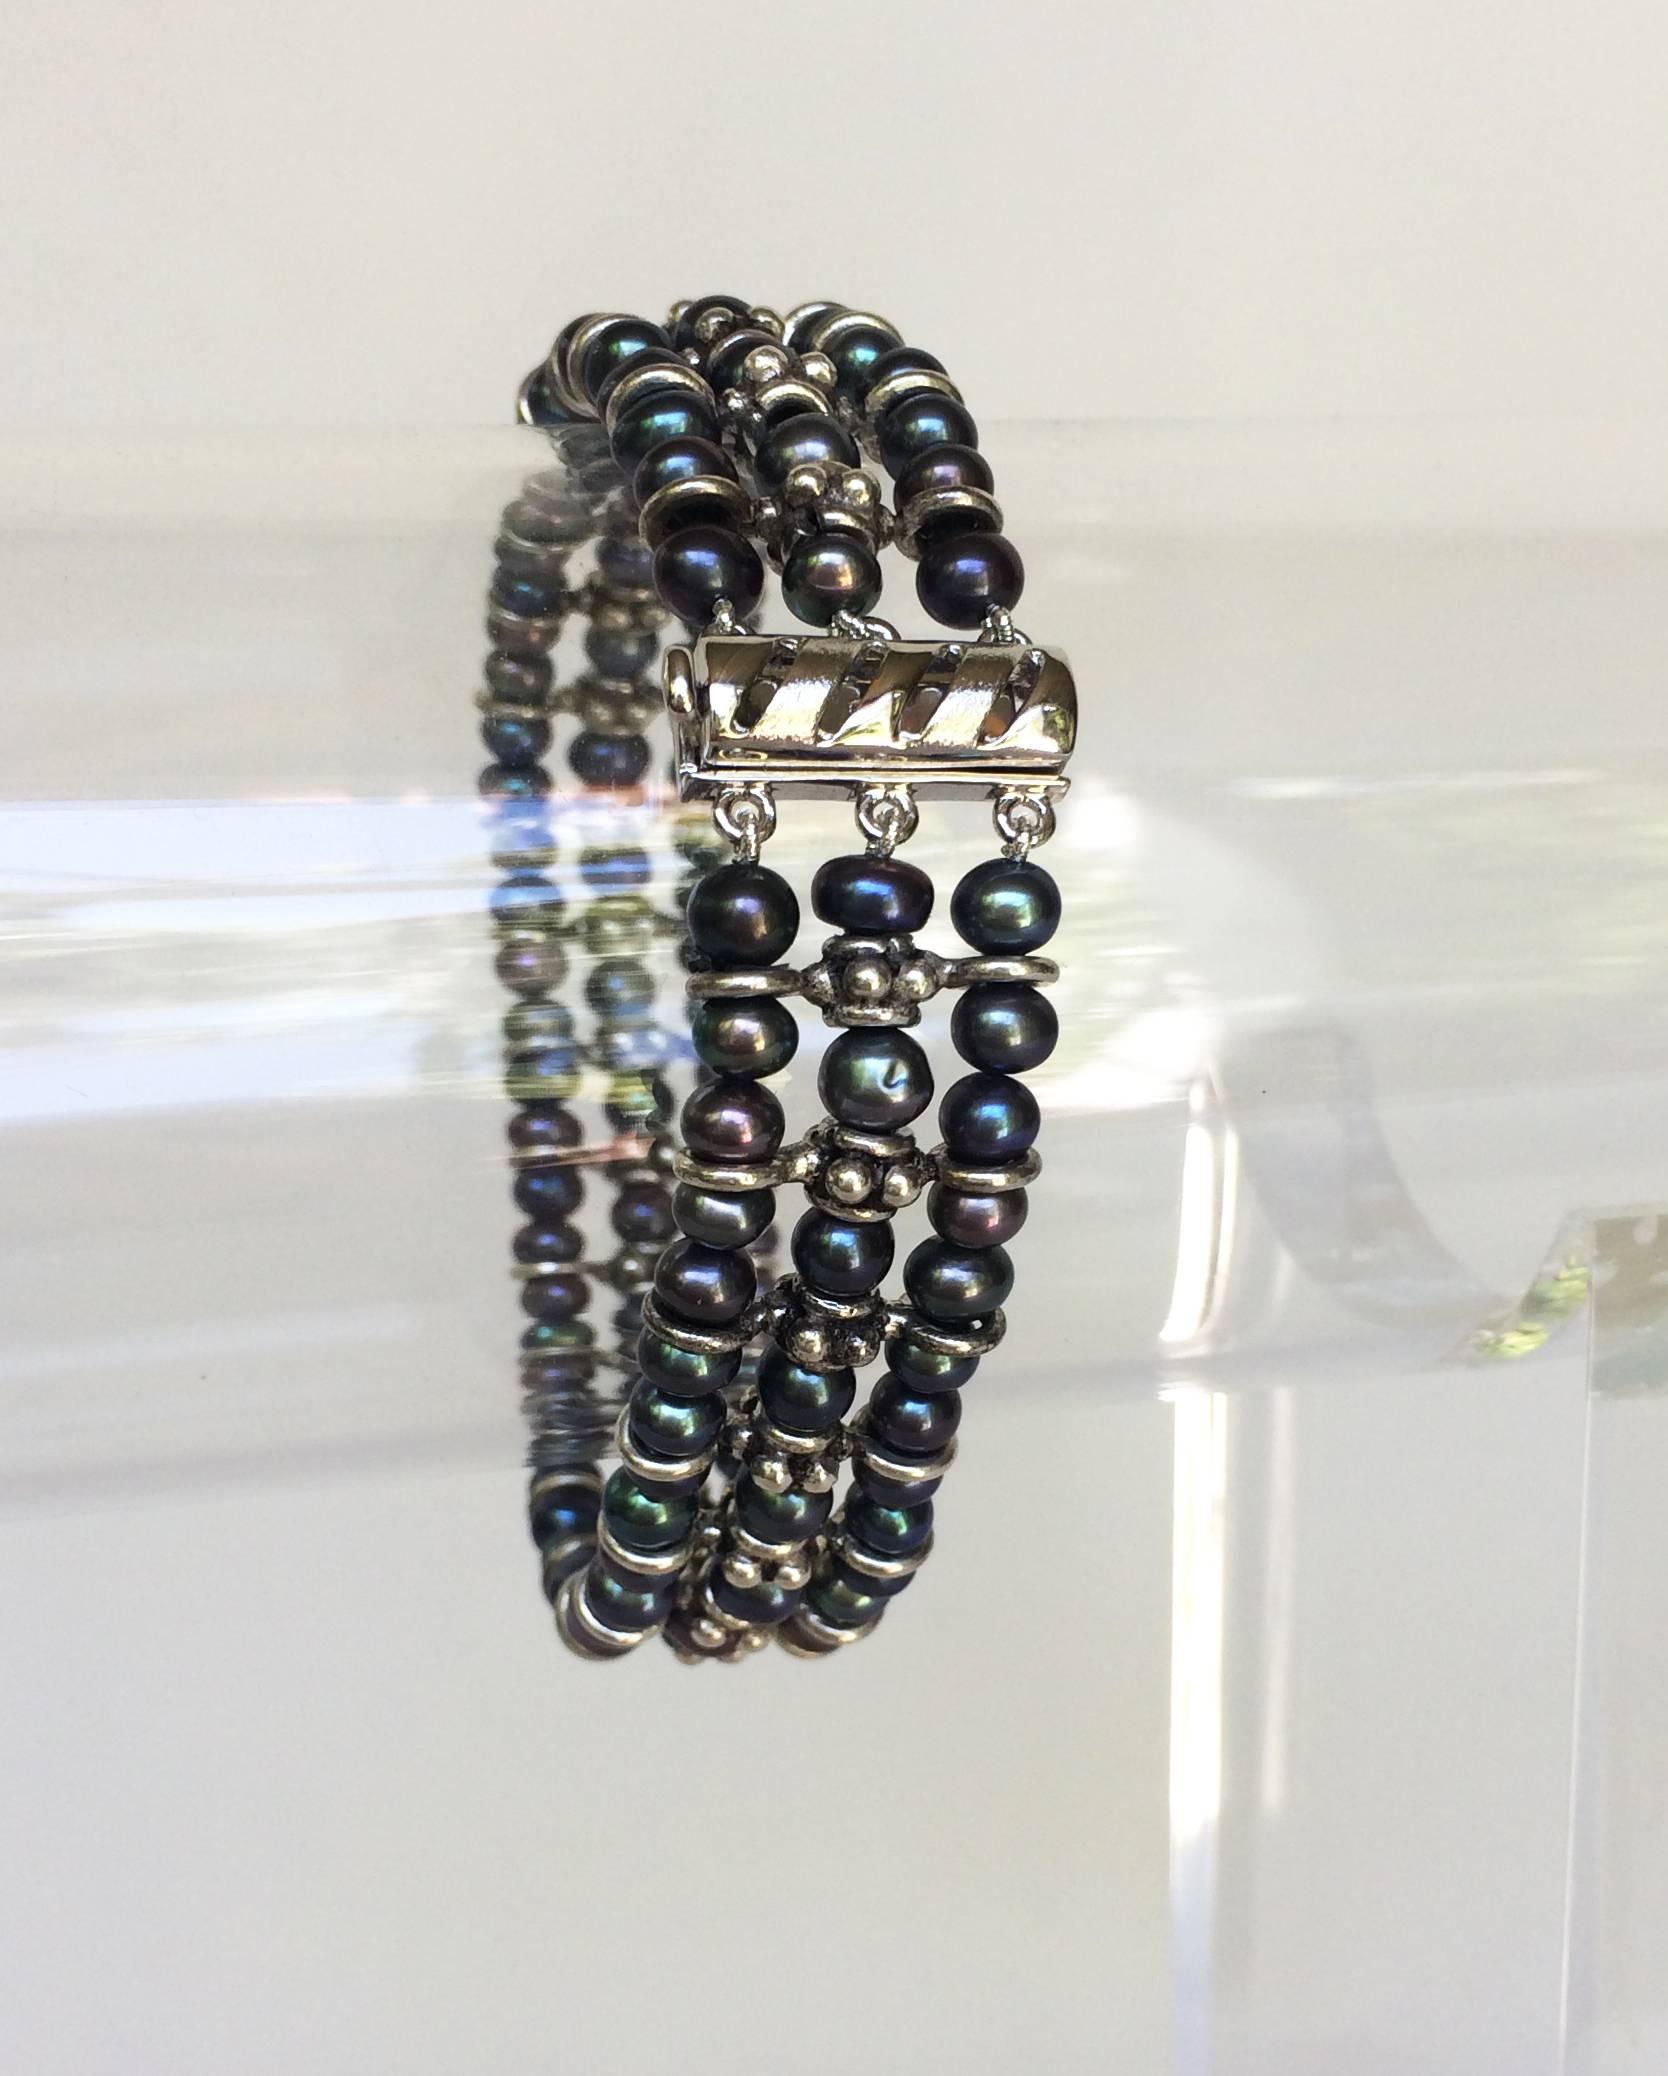 Bead Marina J. Black Pearl and Silver Bracelet with Sterling Silver Sliding Clasp